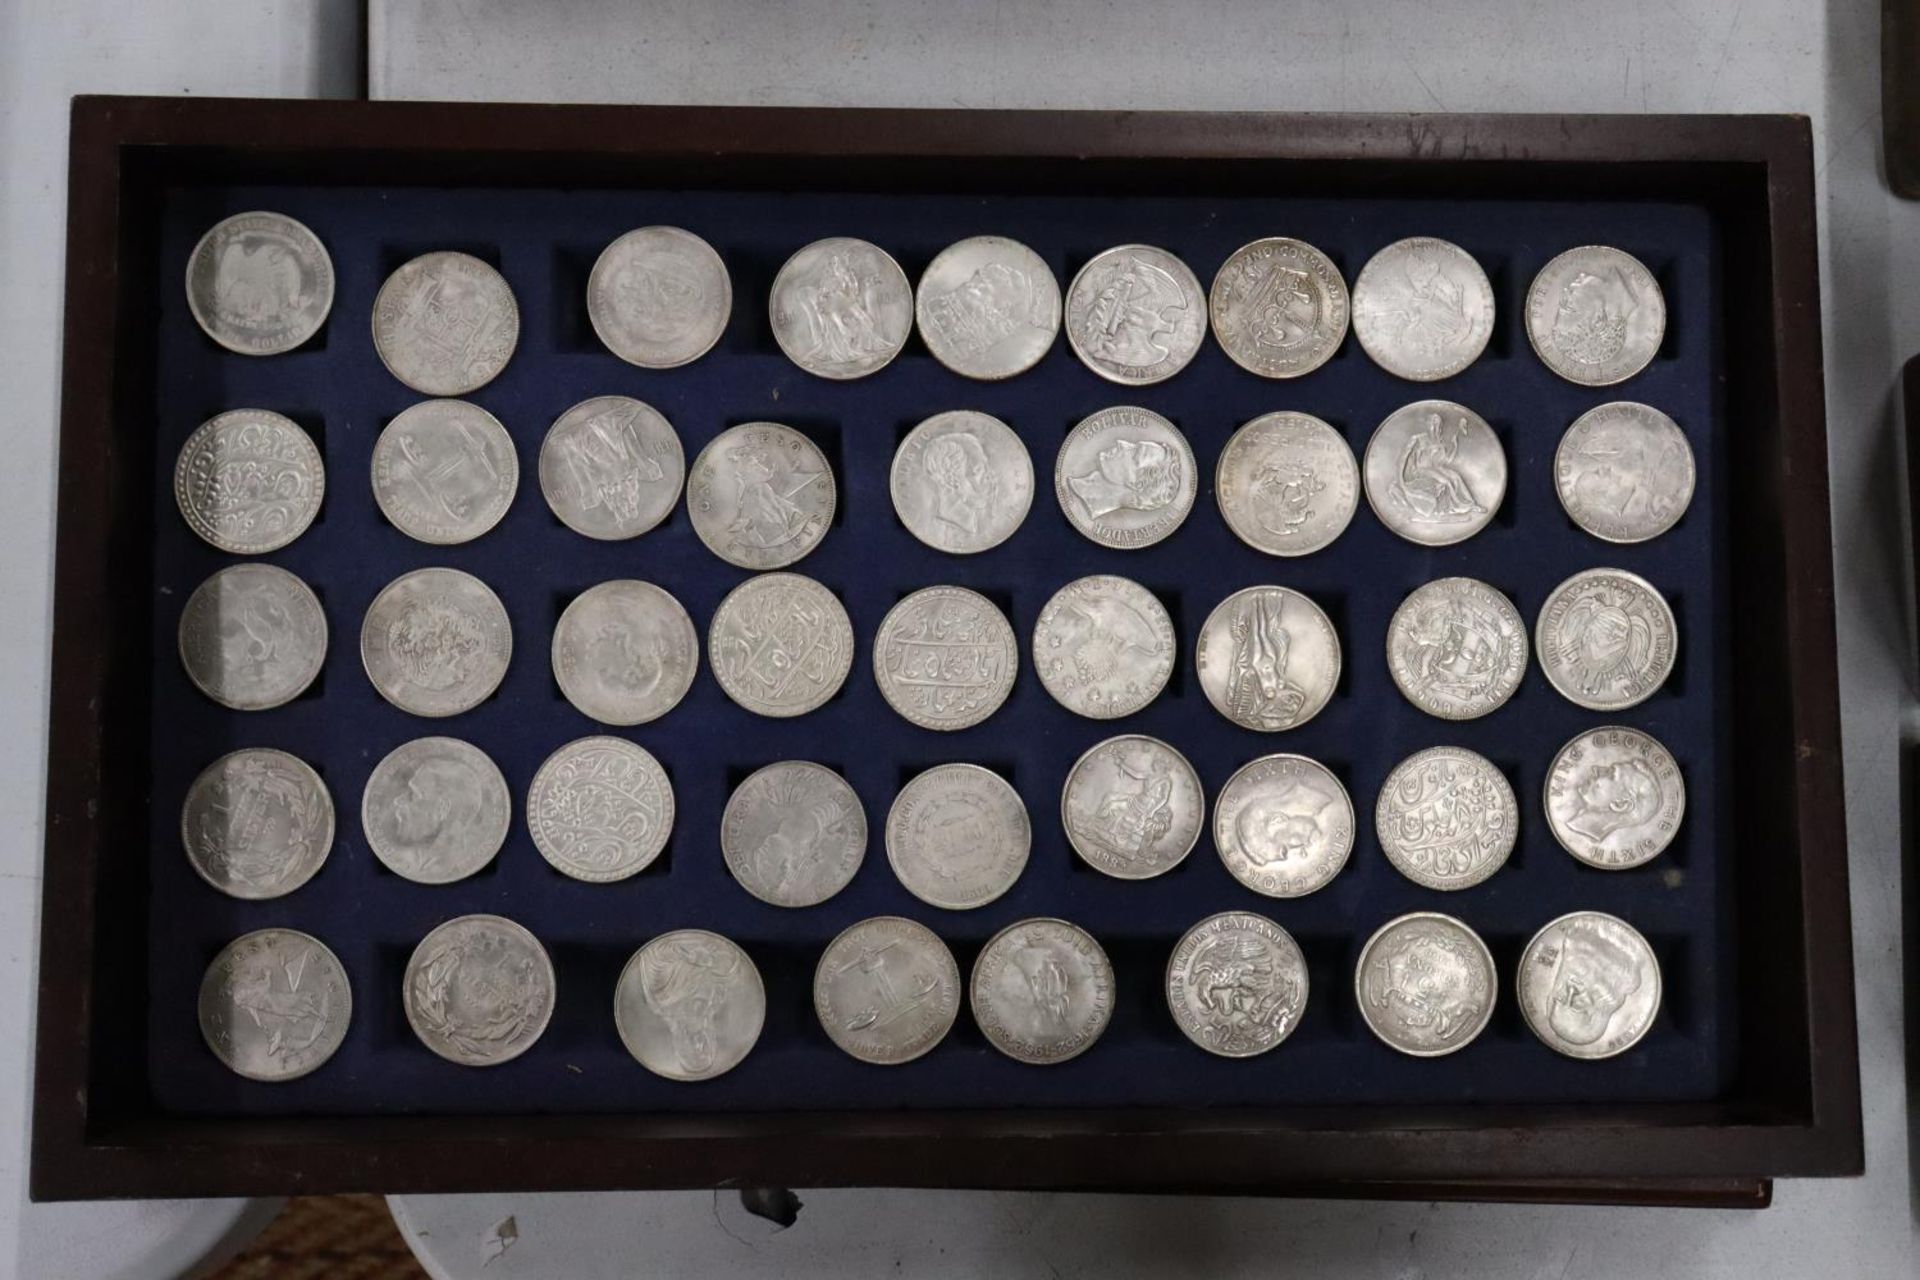 FORTY FOUR VARIOUS VINTAGE TOKENS/COINS IN A WOODEN BOX - Image 3 of 6